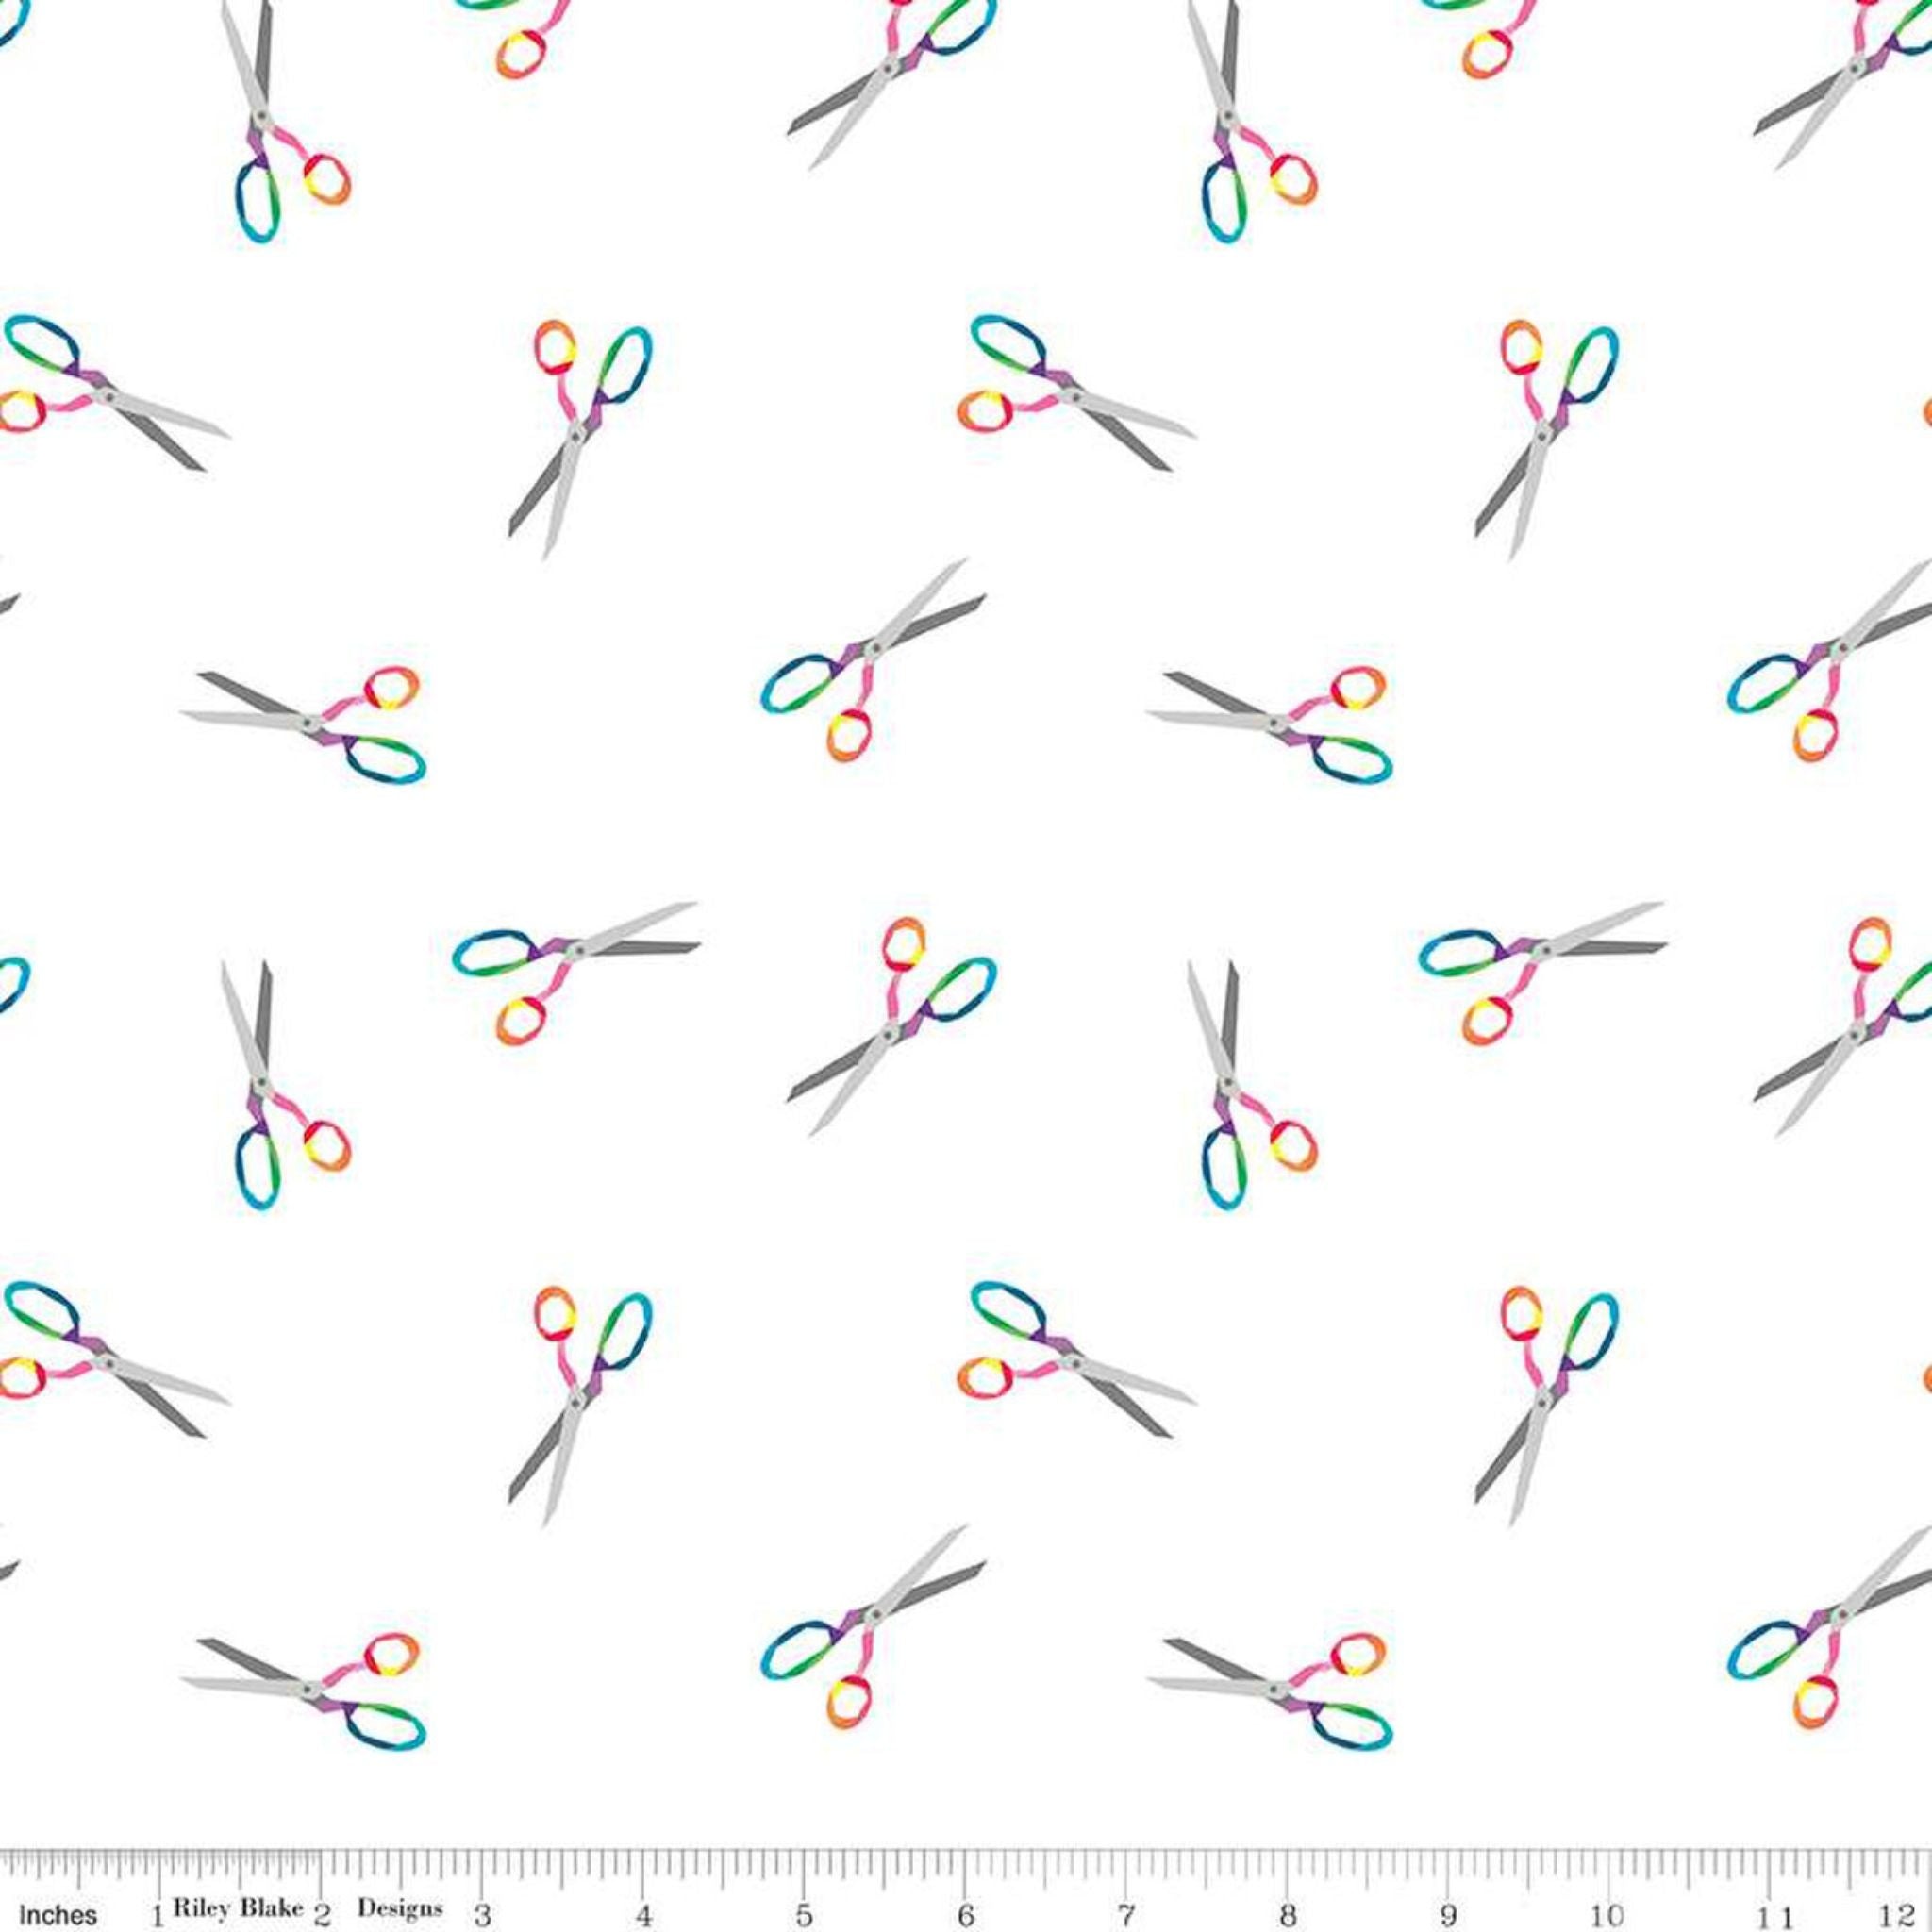 Rainbow sewing scissors on white cotton fabric - Make by Riley Blake